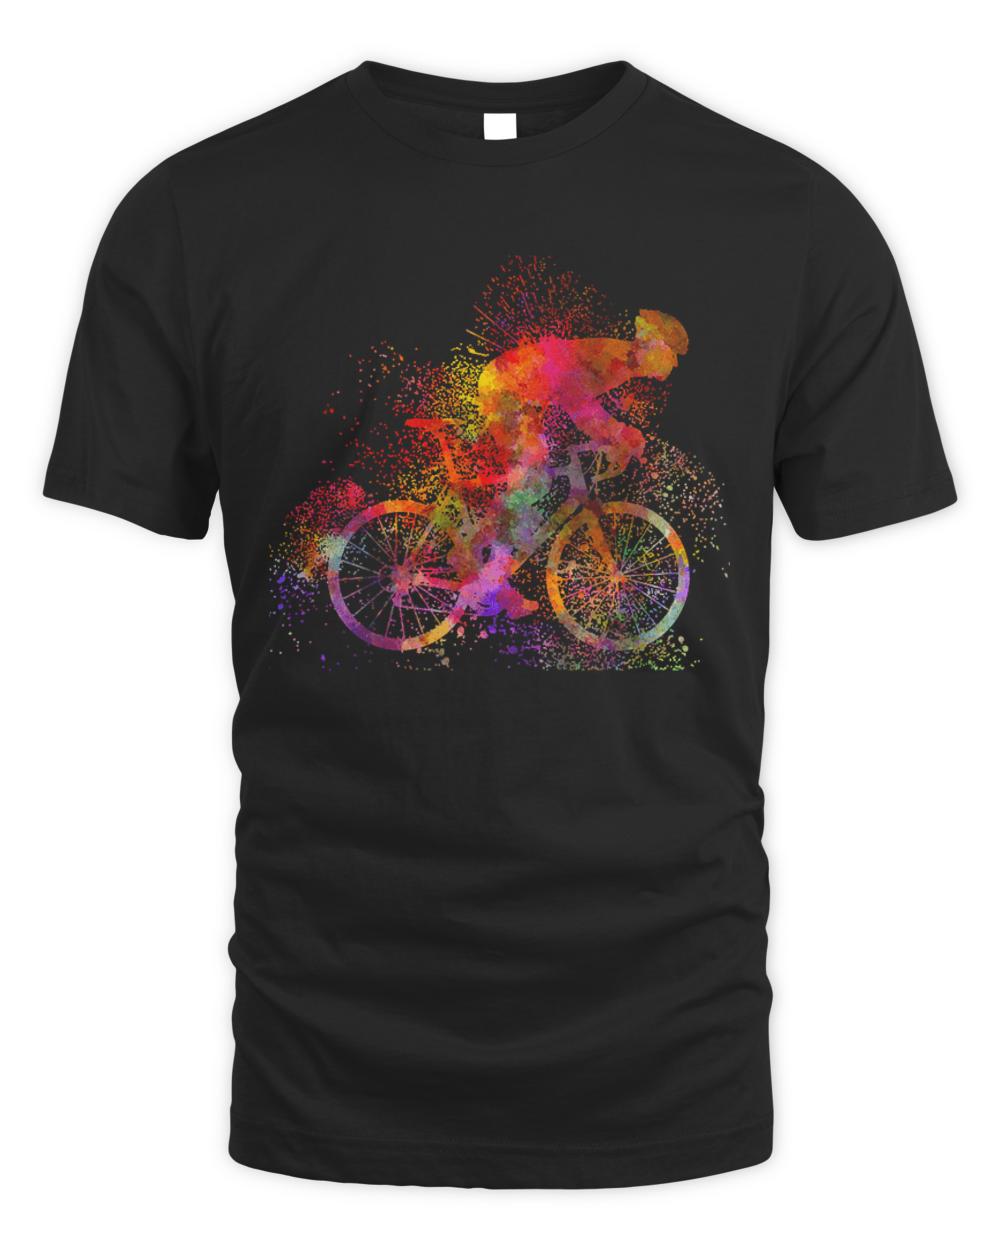 Ccyclist T- Shirtccyclist road bike in watercolor T- Shirt